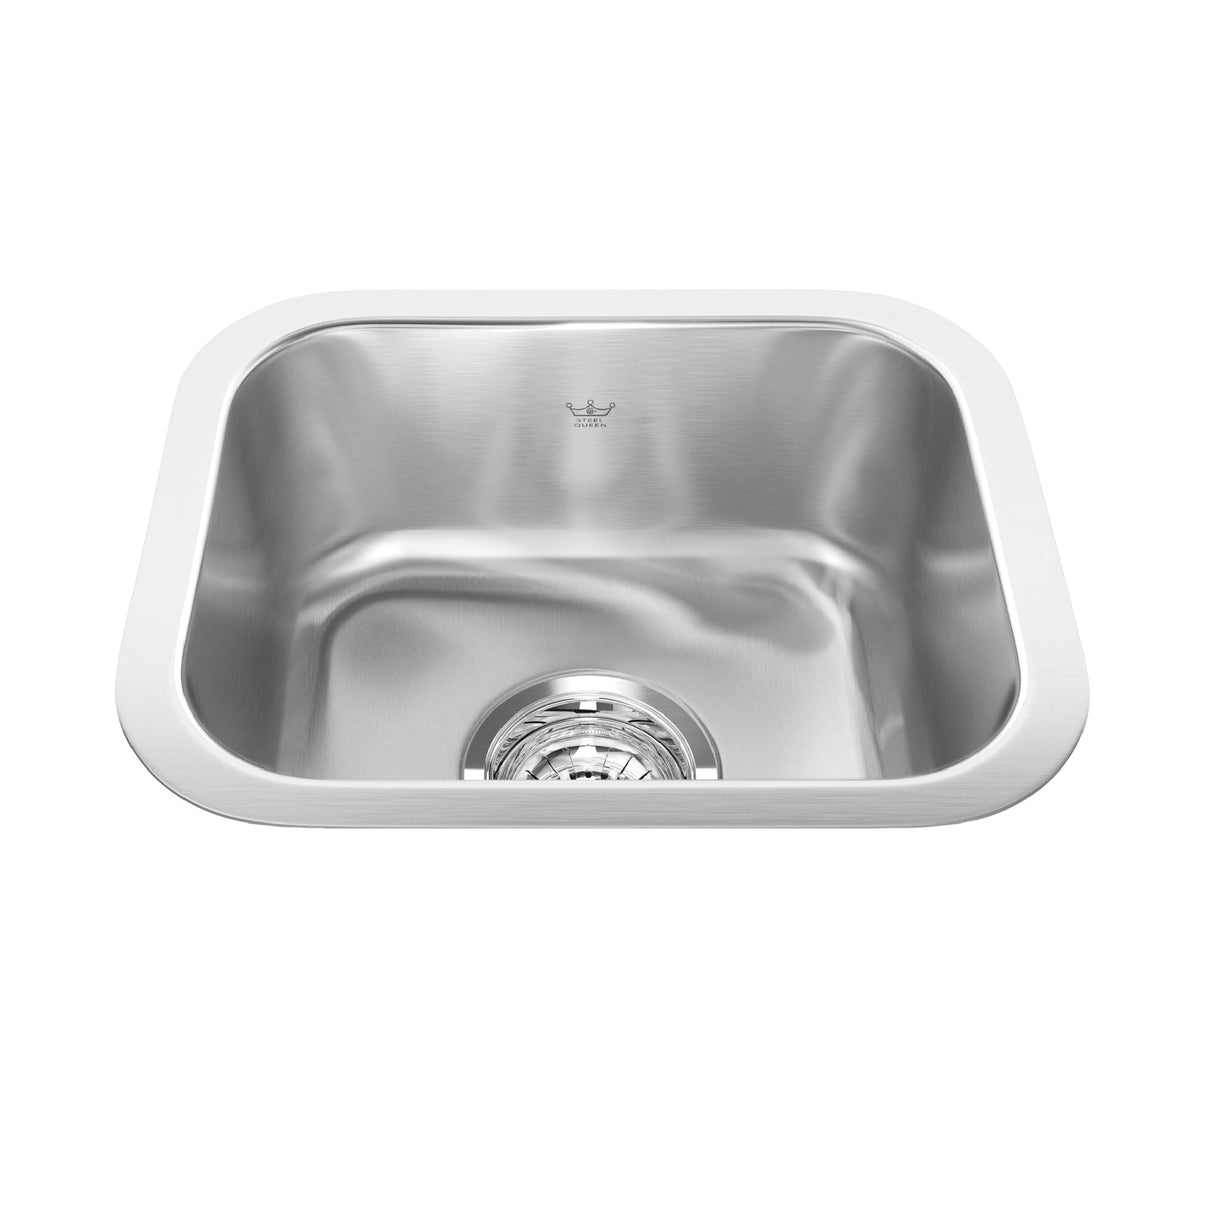 KINDRED QSU1113-6N Steel Queen 13.38-in LR x 11-in FB x 6-in DP Undermount Single Bowl Stainless Steel Hospitality Sink In Satin Finished Bowl with Silk Finished Rim